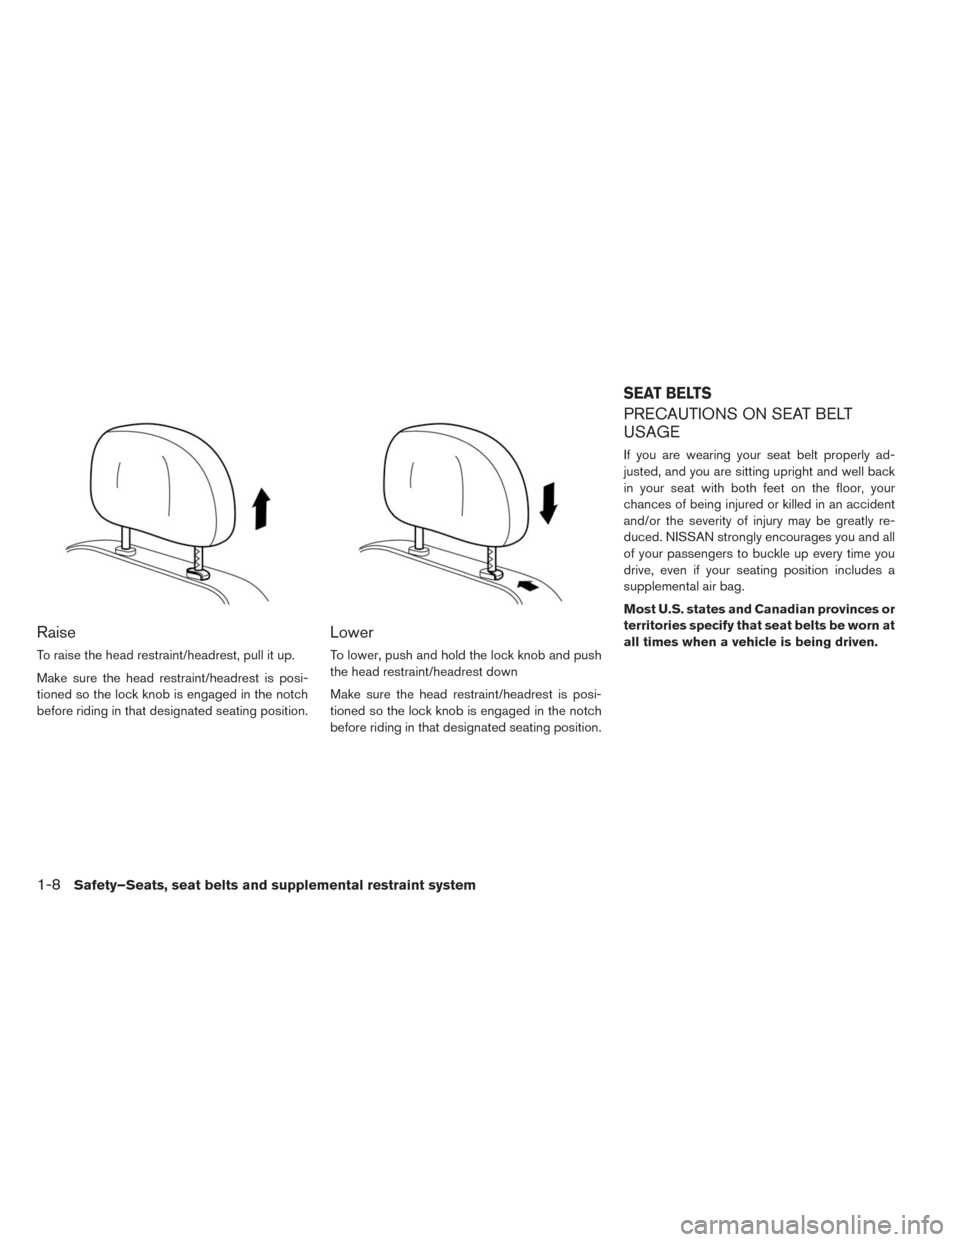 NISSAN LEAF 2014 1.G Owners Manual Raise
To raise the head restraint/headrest, pull it up.
Make sure the head restraint/headrest is posi-
tioned so the lock knob is engaged in the notch
before riding in that designated seating position